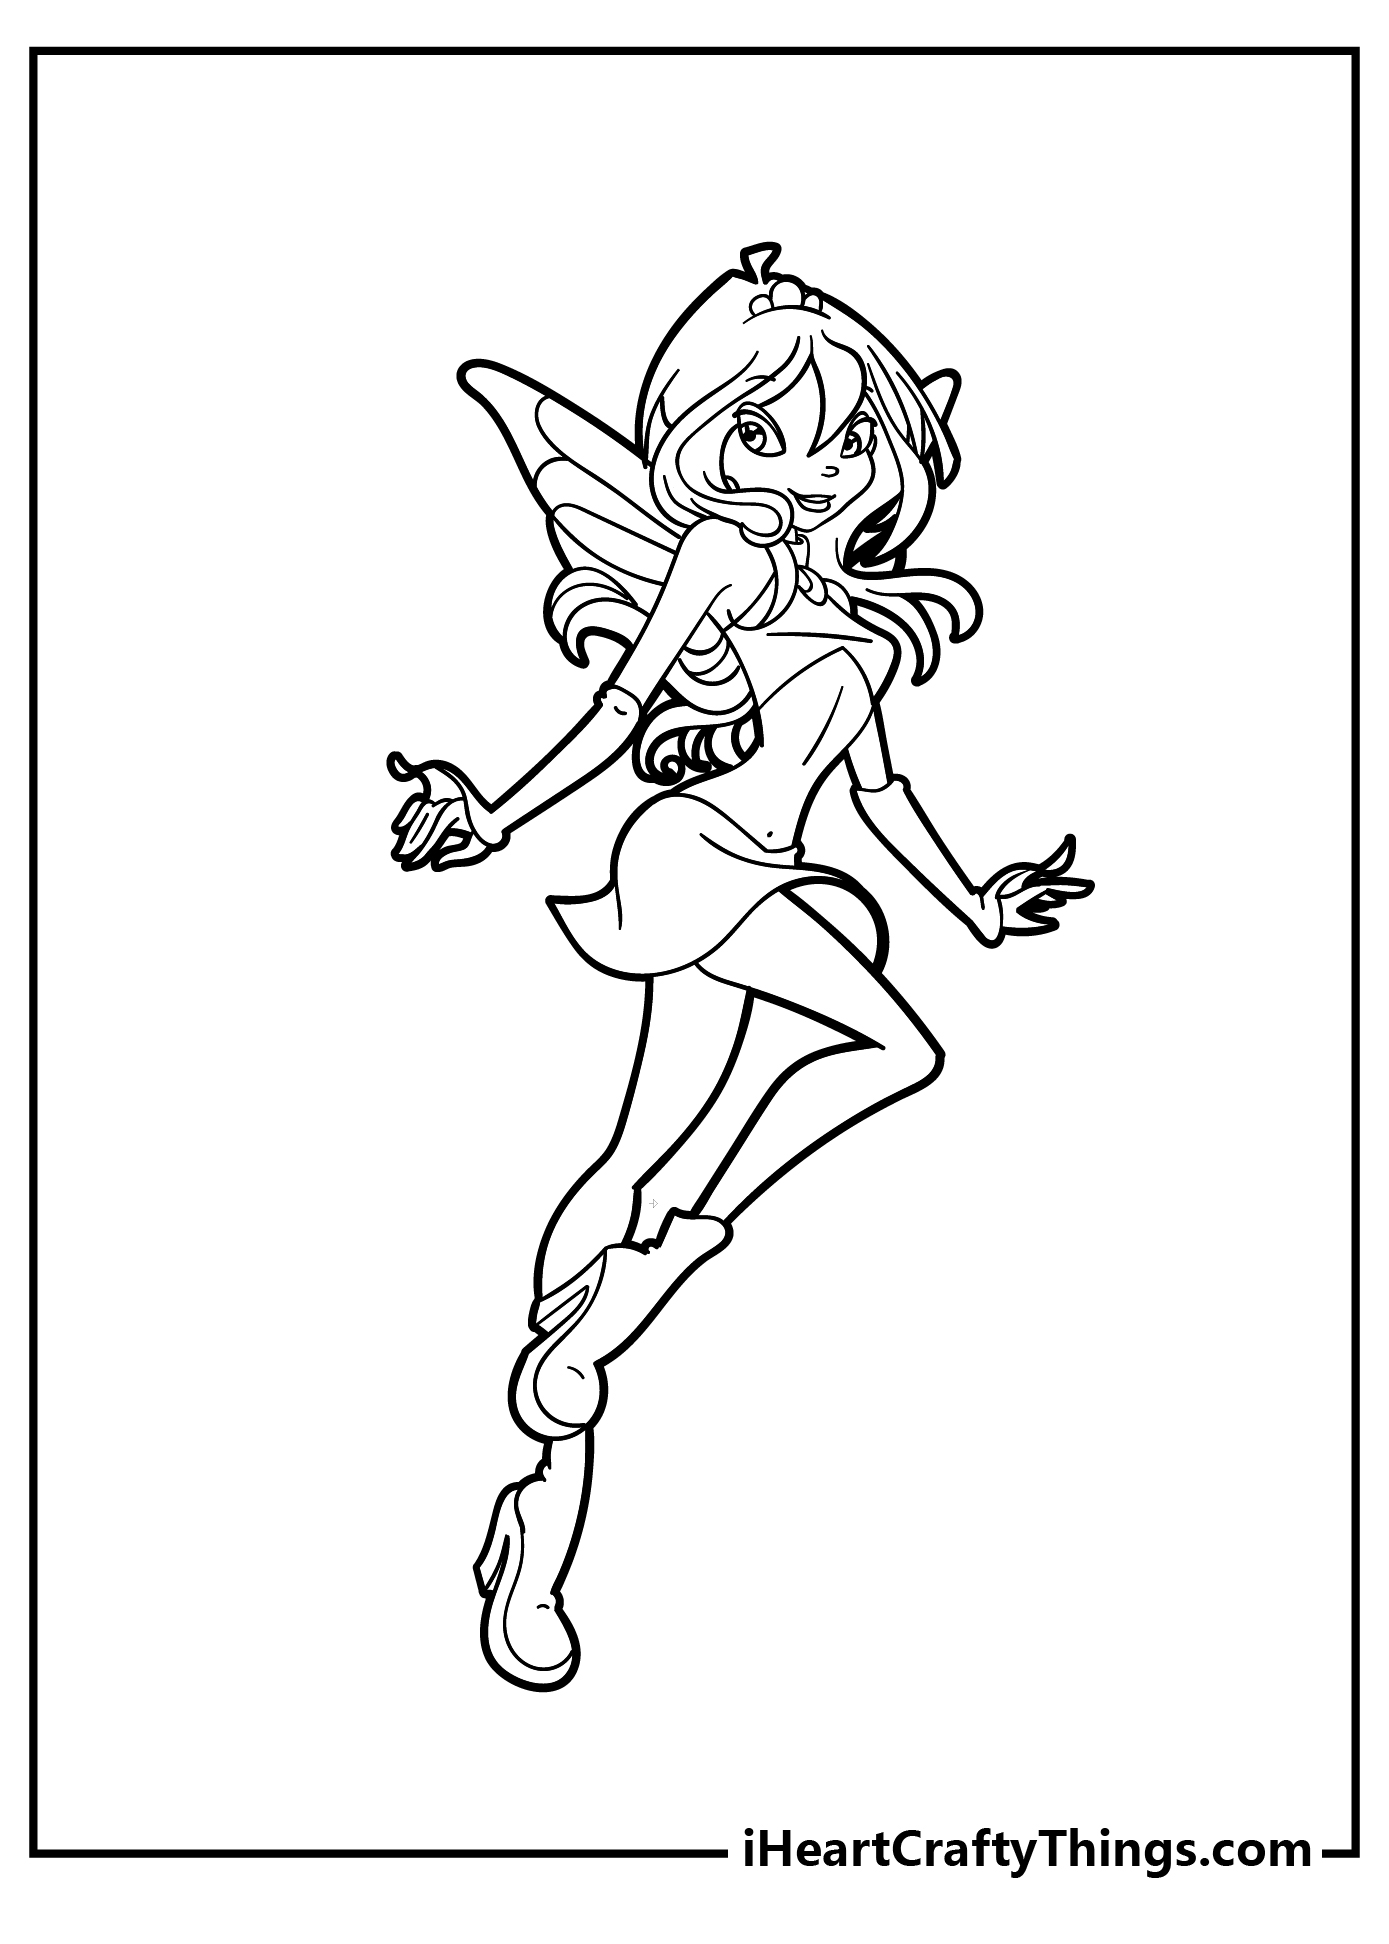 Winx Coloring Pages for adults free printable